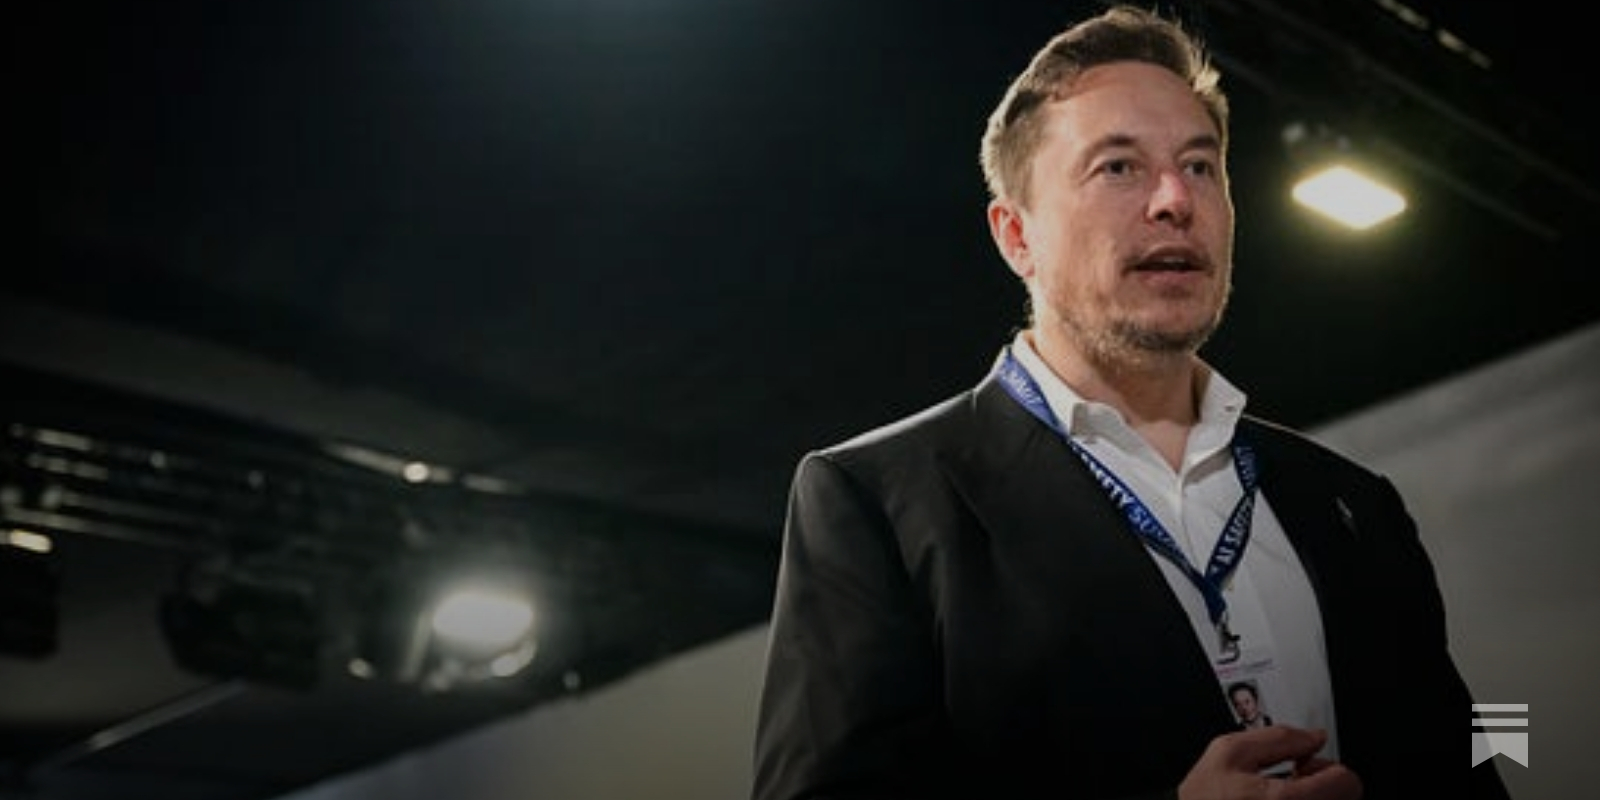 Comments - Business leaders are ignoring Elon Musk's antisemitism